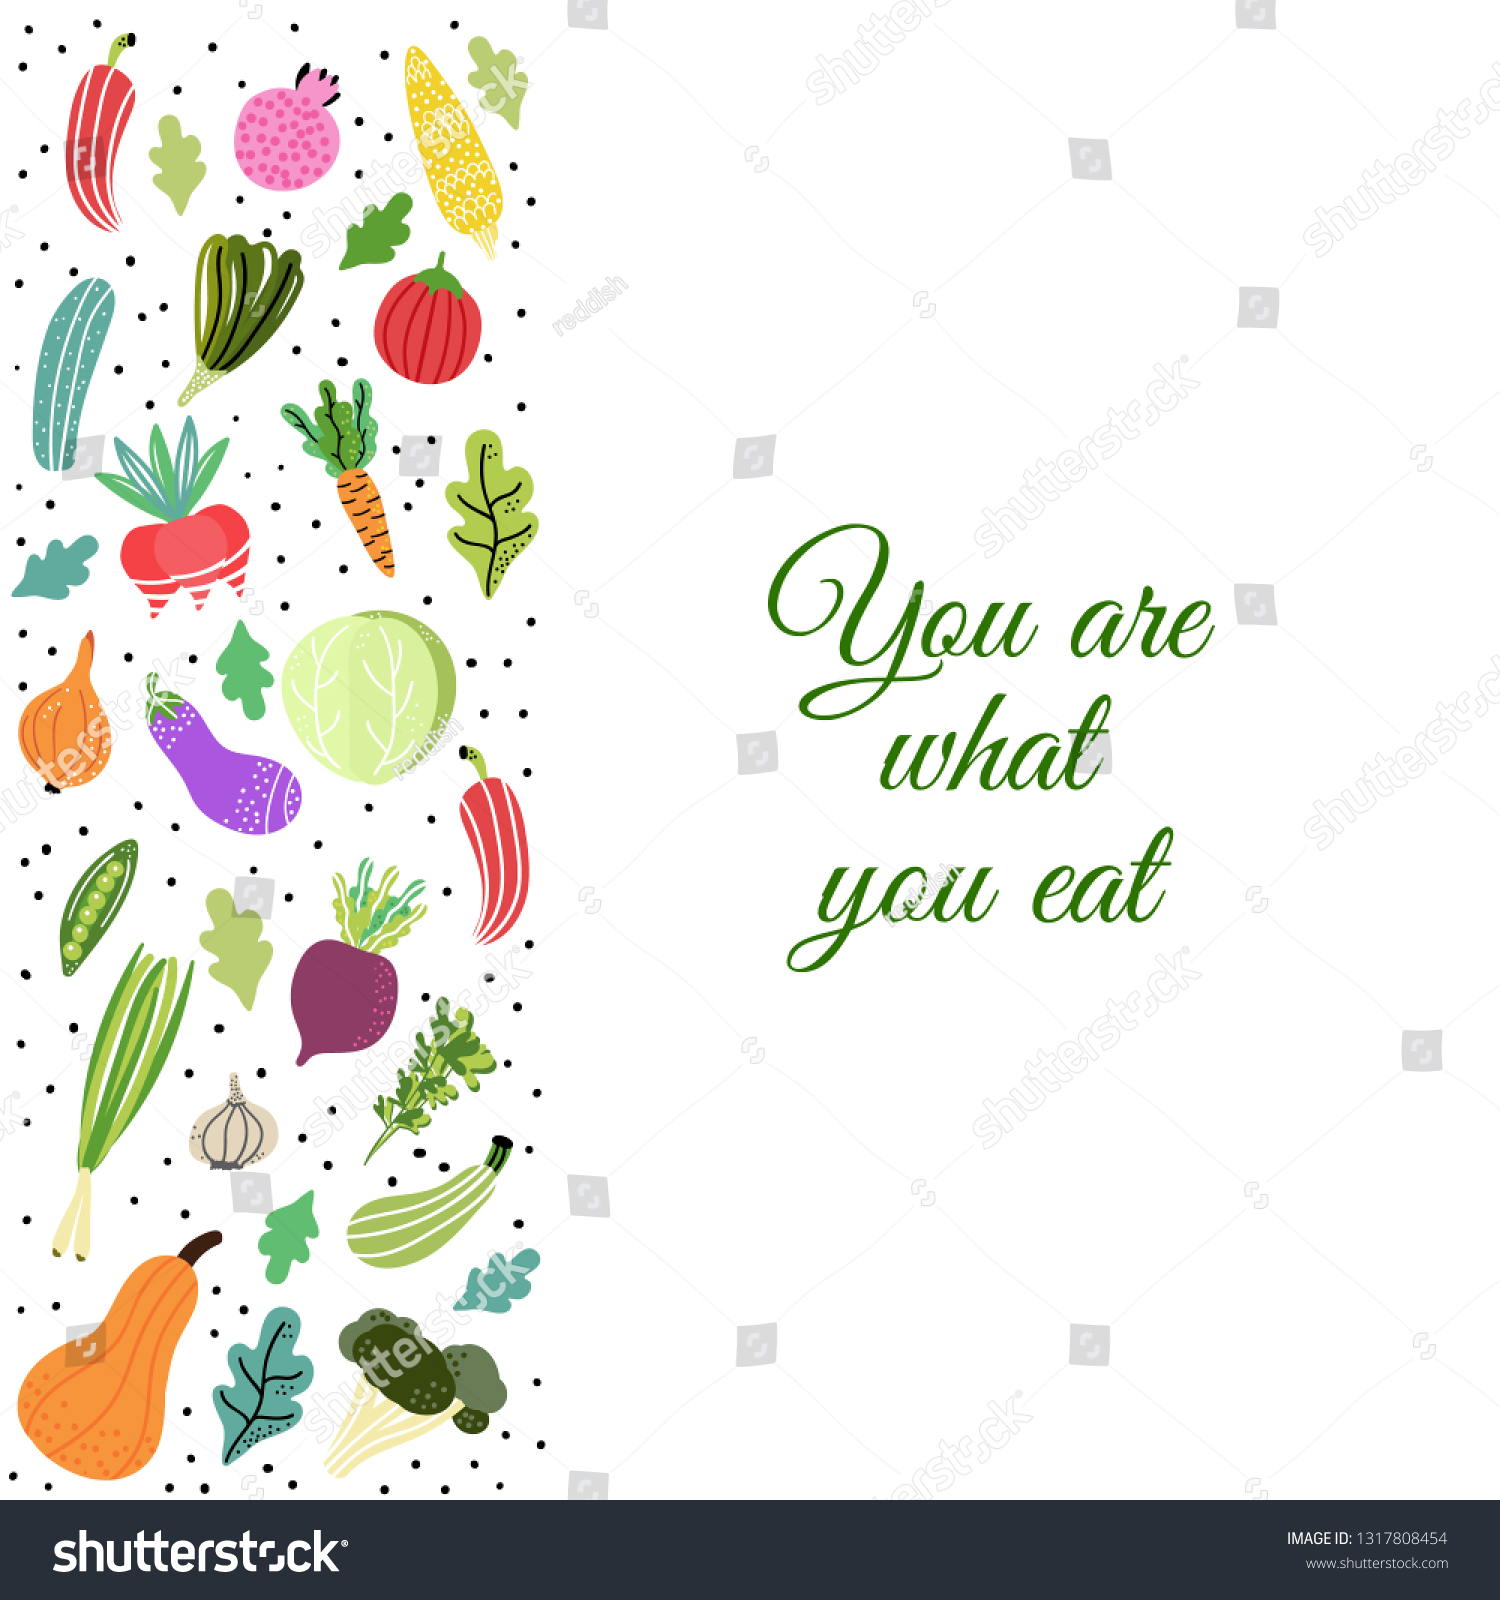 You are what you eat. Organic and fresh vegetables.Concept of healthy eating and lifestyle. Vector Illustration. #1317808454